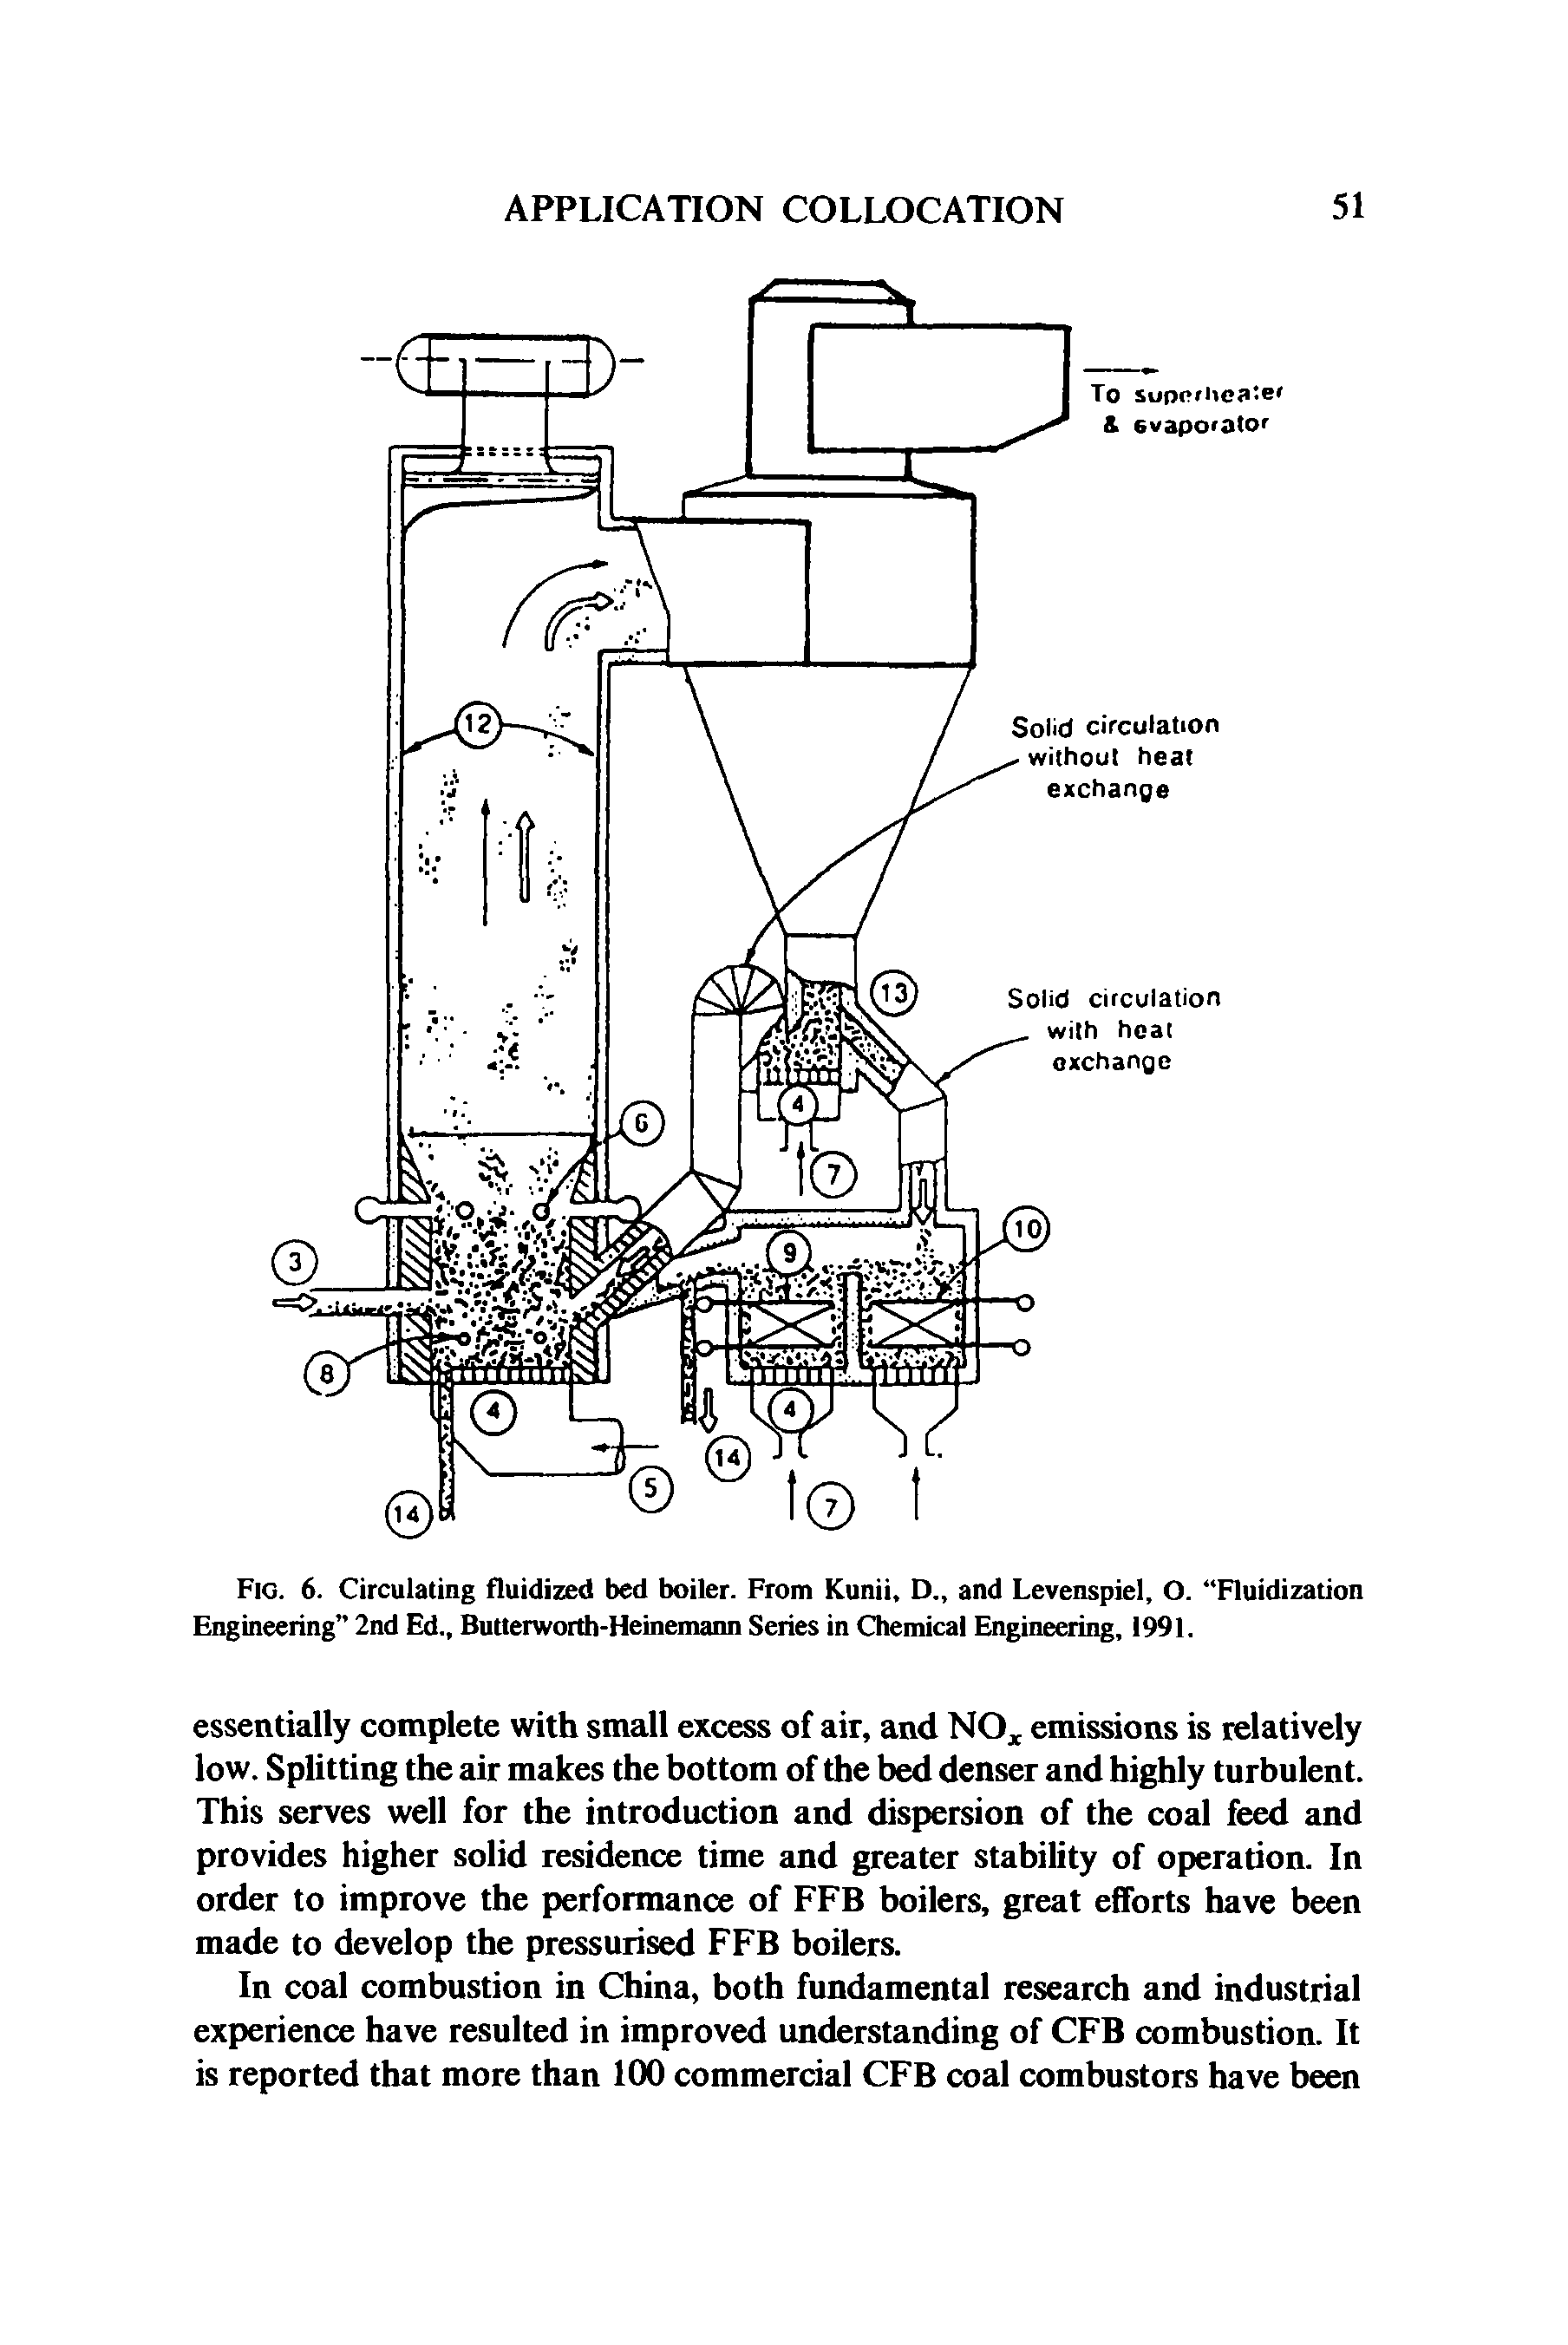 Fig. 6. Circulating fluidized bed boiler. From Kunii, D., and Levenspiel, O. Fluidization Engineering 2nd Ed., Butterworth-Heinemann Series in Chemical Engineering, 1991.